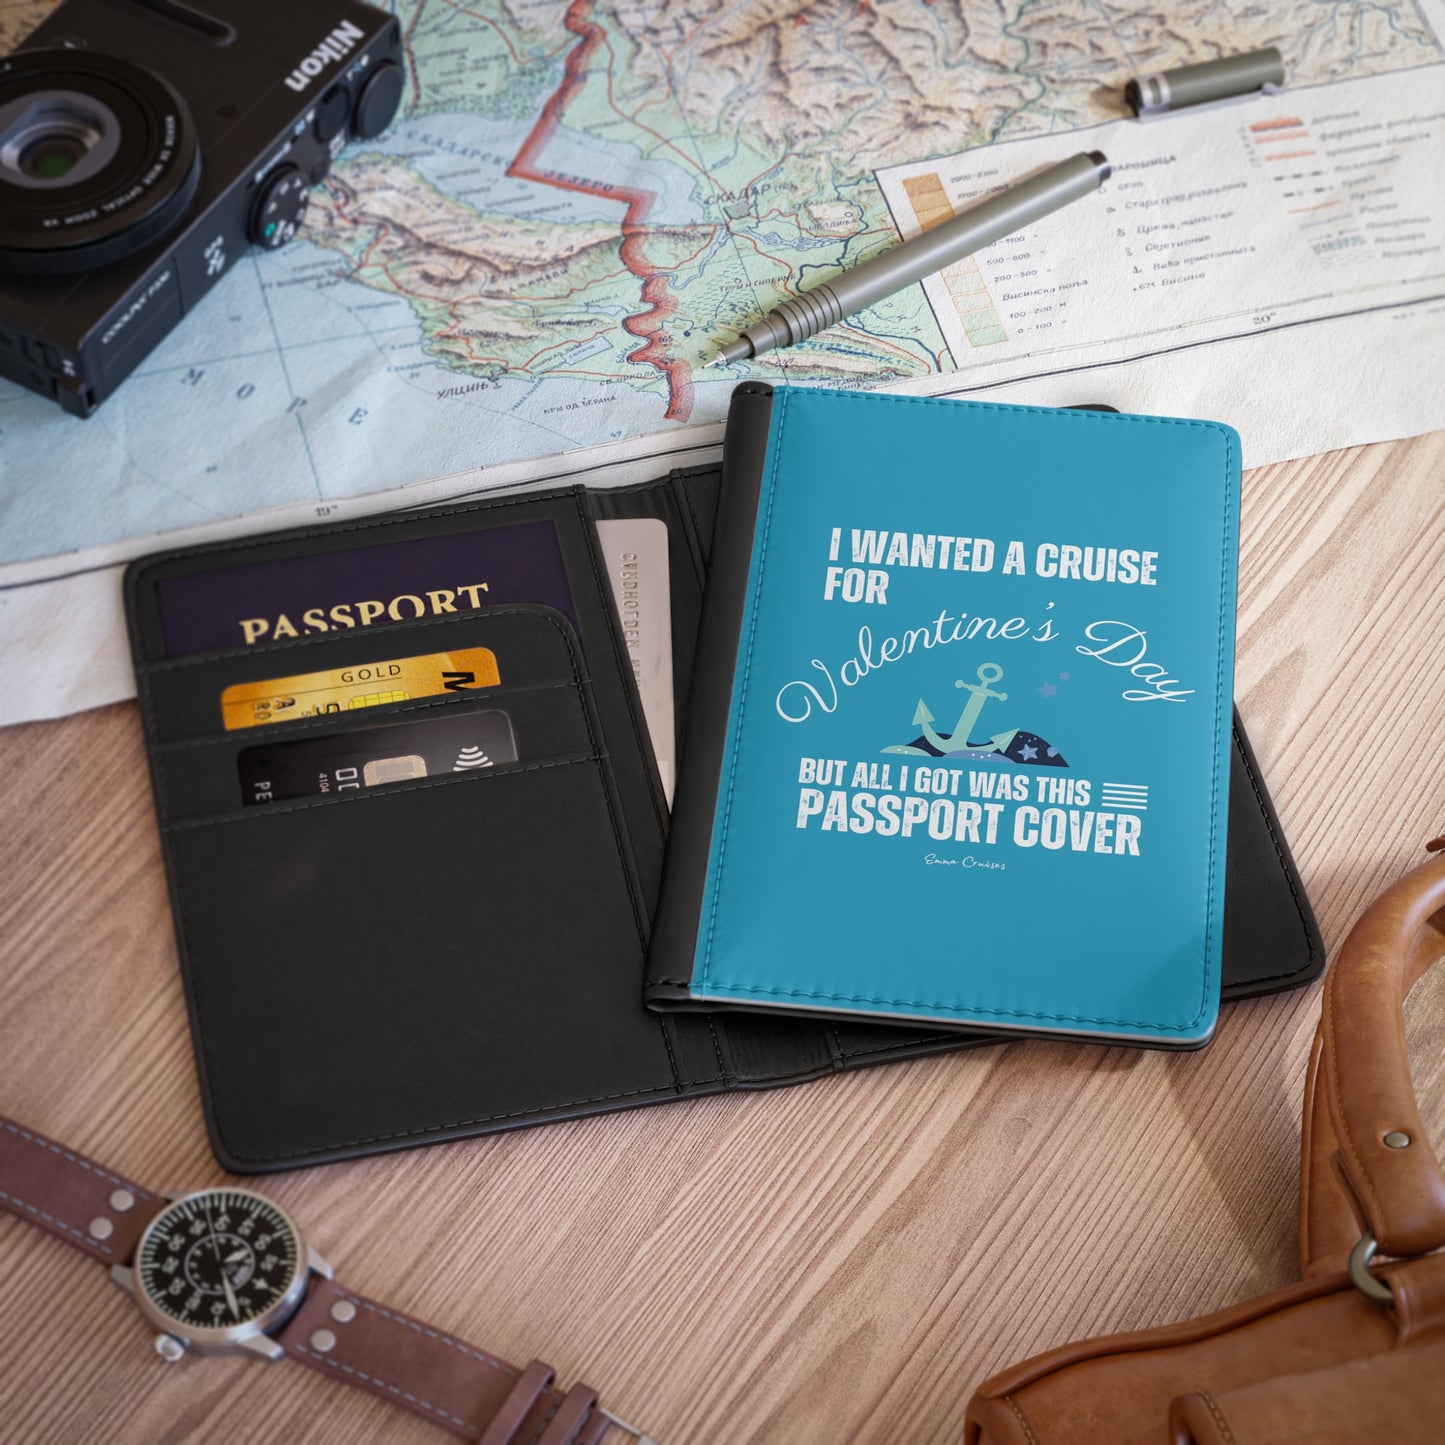 I Wanted a Cruise for Valentine's Day - Passport Cover